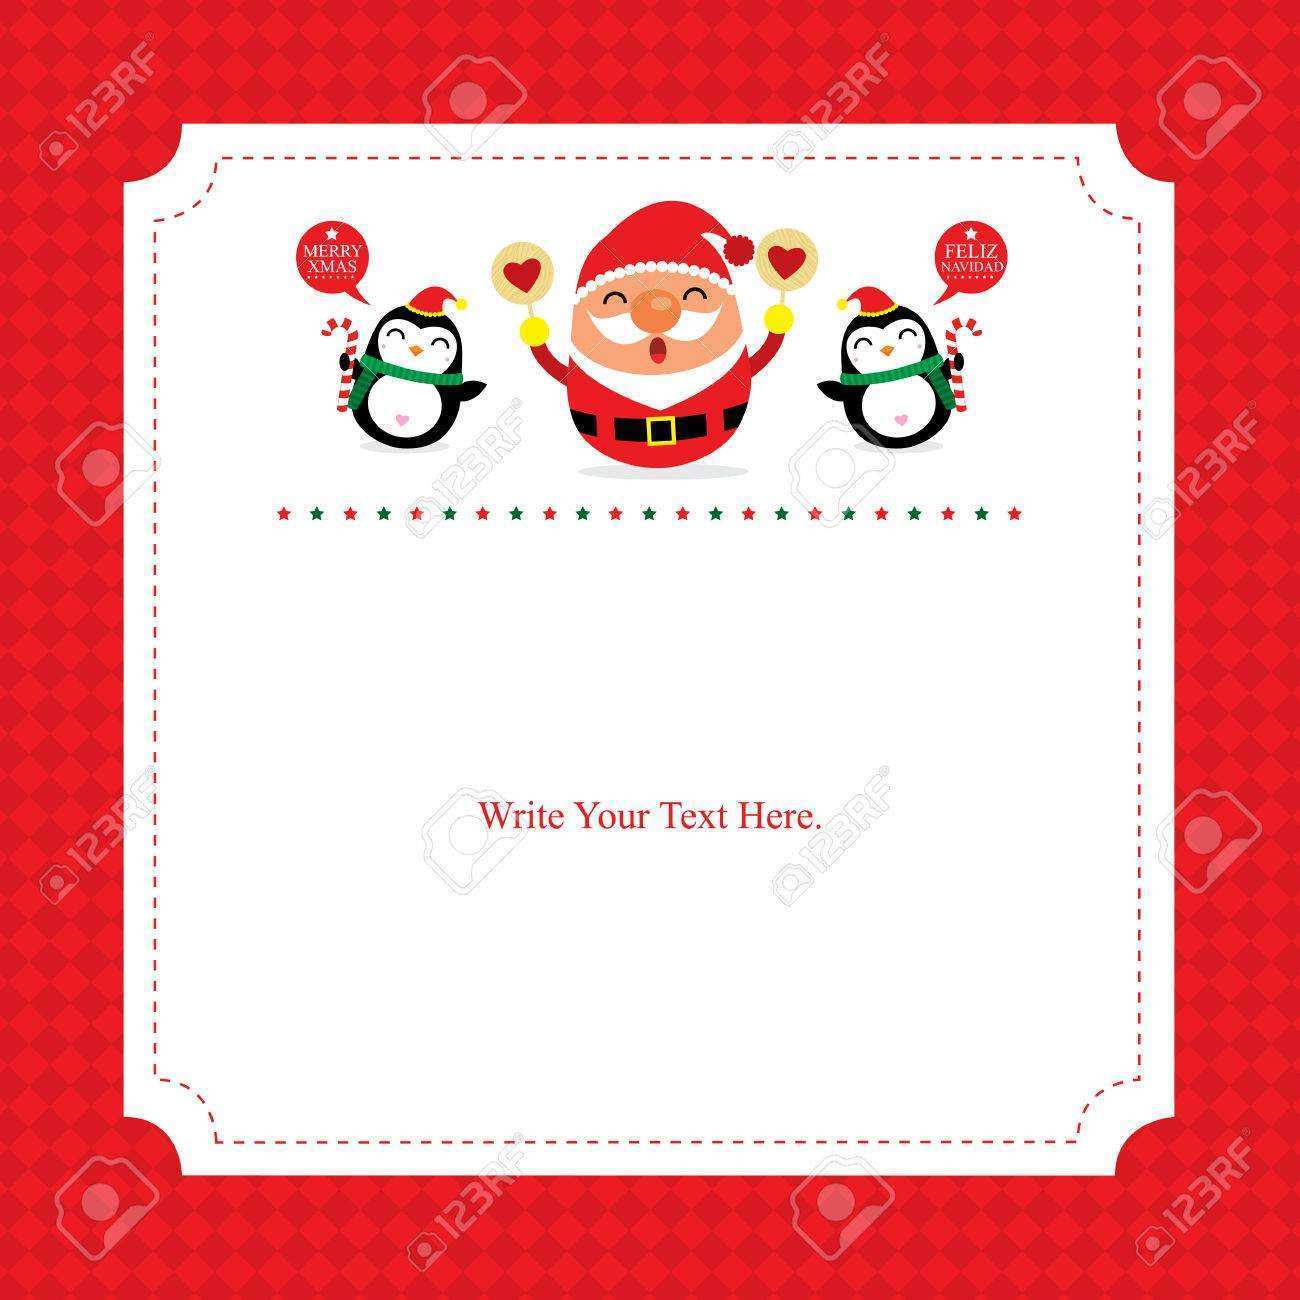 55 Creative Christmas Card Template For Wife Layouts for Christmas Card Template For Wife